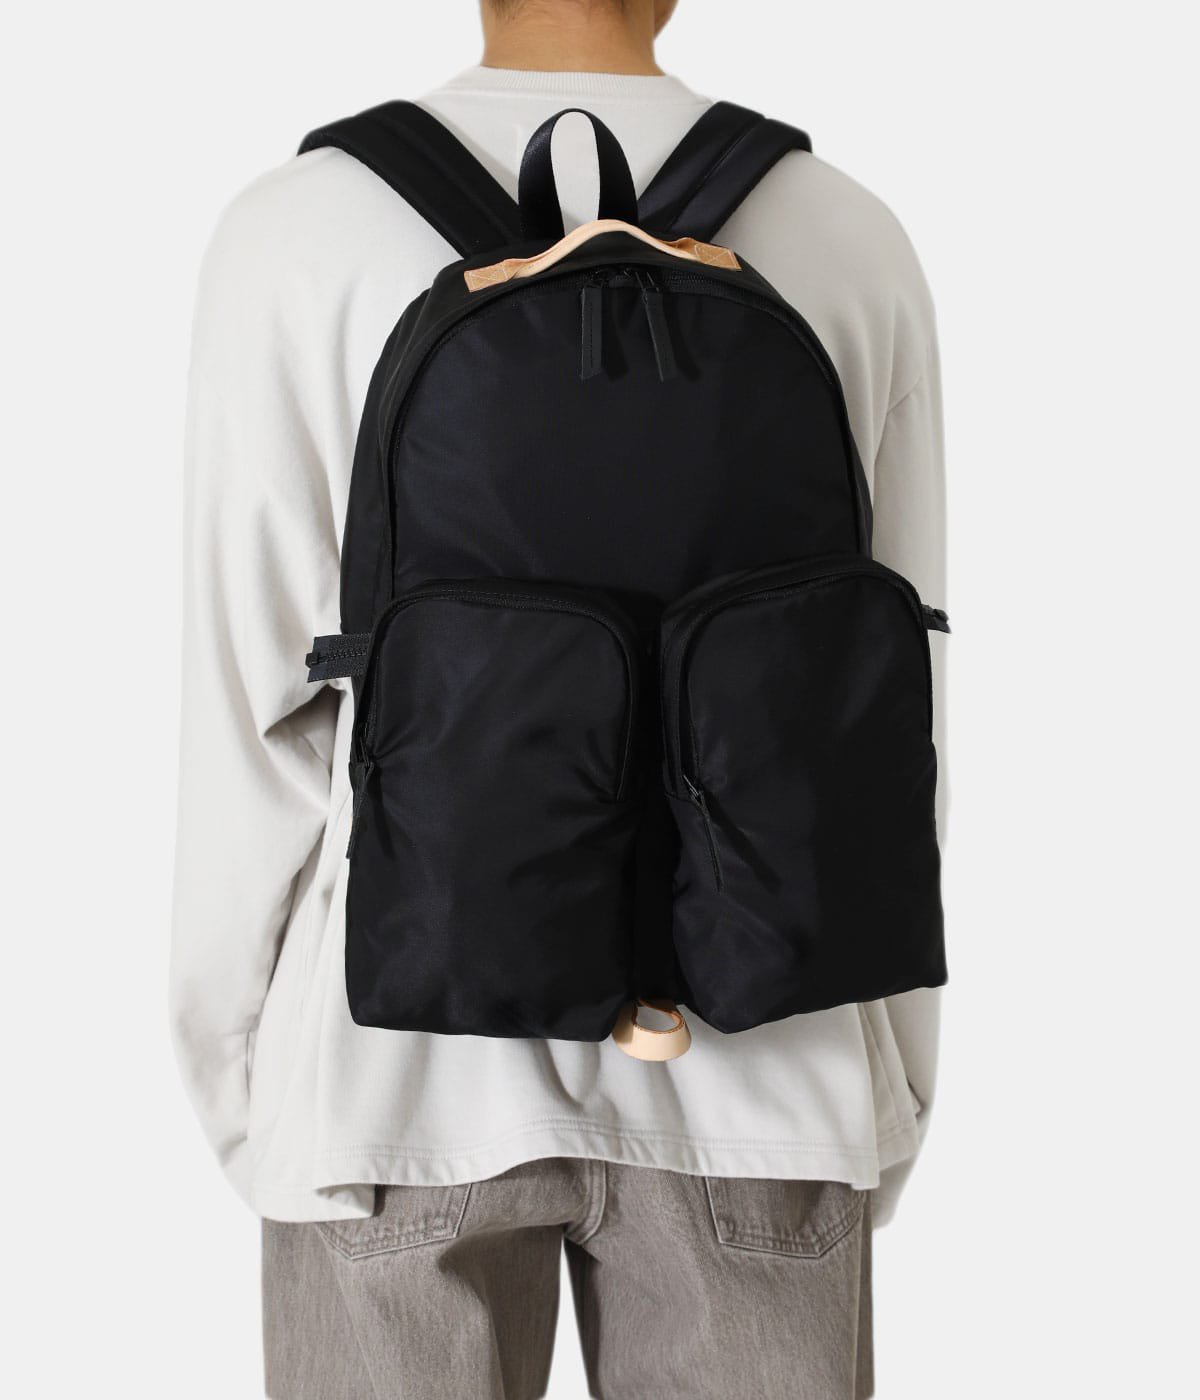 packing DOUBLE POCKET BACKPACK 黒 - 通販 - guianegro.com.br